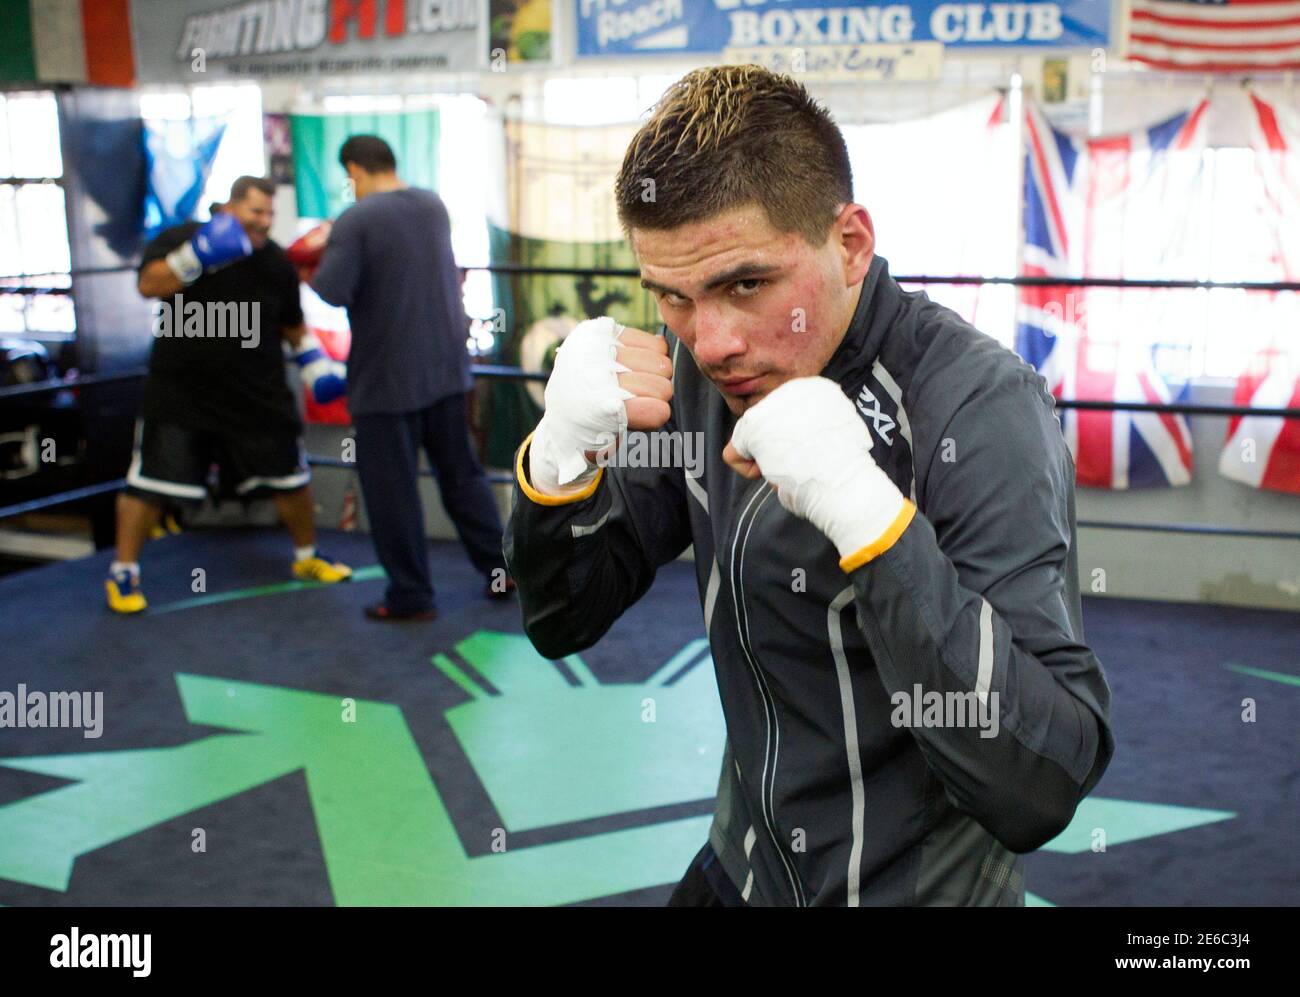 Amateur boxer Jose Ramirez of the U.S. poses at the Wild Card Boxing Club in Hollywood, California July 3, 2012. Ramirez will be heading to the 2012 London Olympics to represent the U.S. in the 132-pound class. REUTERS/Steve Marcus (UNITED STATES - Tags: SPORT BOXING OLYMPICS) Stock Photo